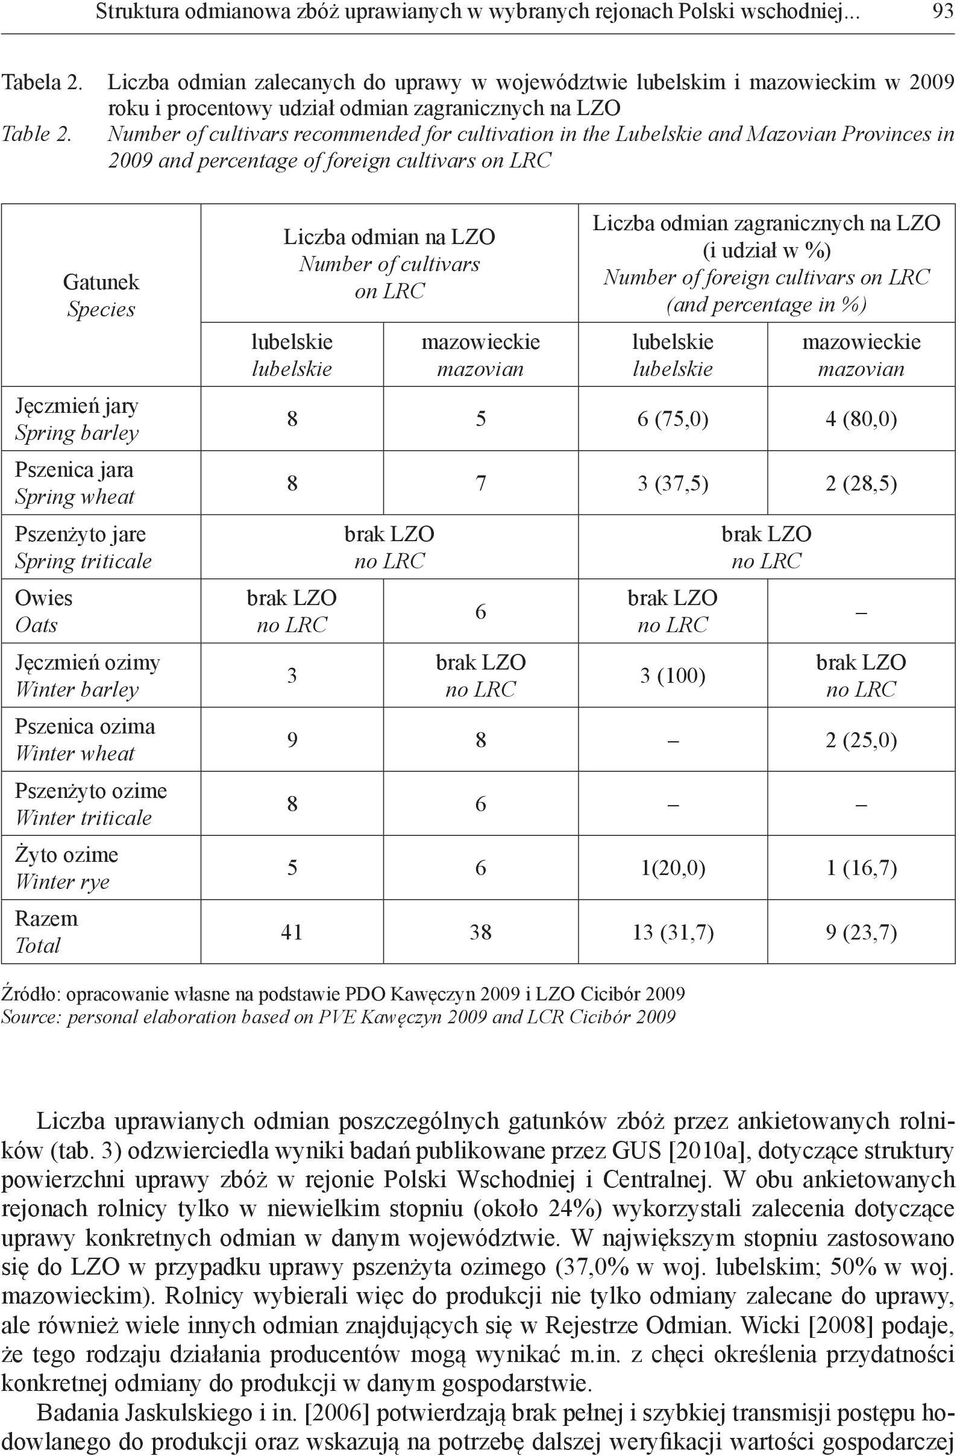 Number of cultivars recommended for cultivation in the Lubelskie and Mazovian Provinces in 2009 and percentage of foreign cultivars on LRC Gatunek Species Jęczmień jary Spring barley Pszenica jara